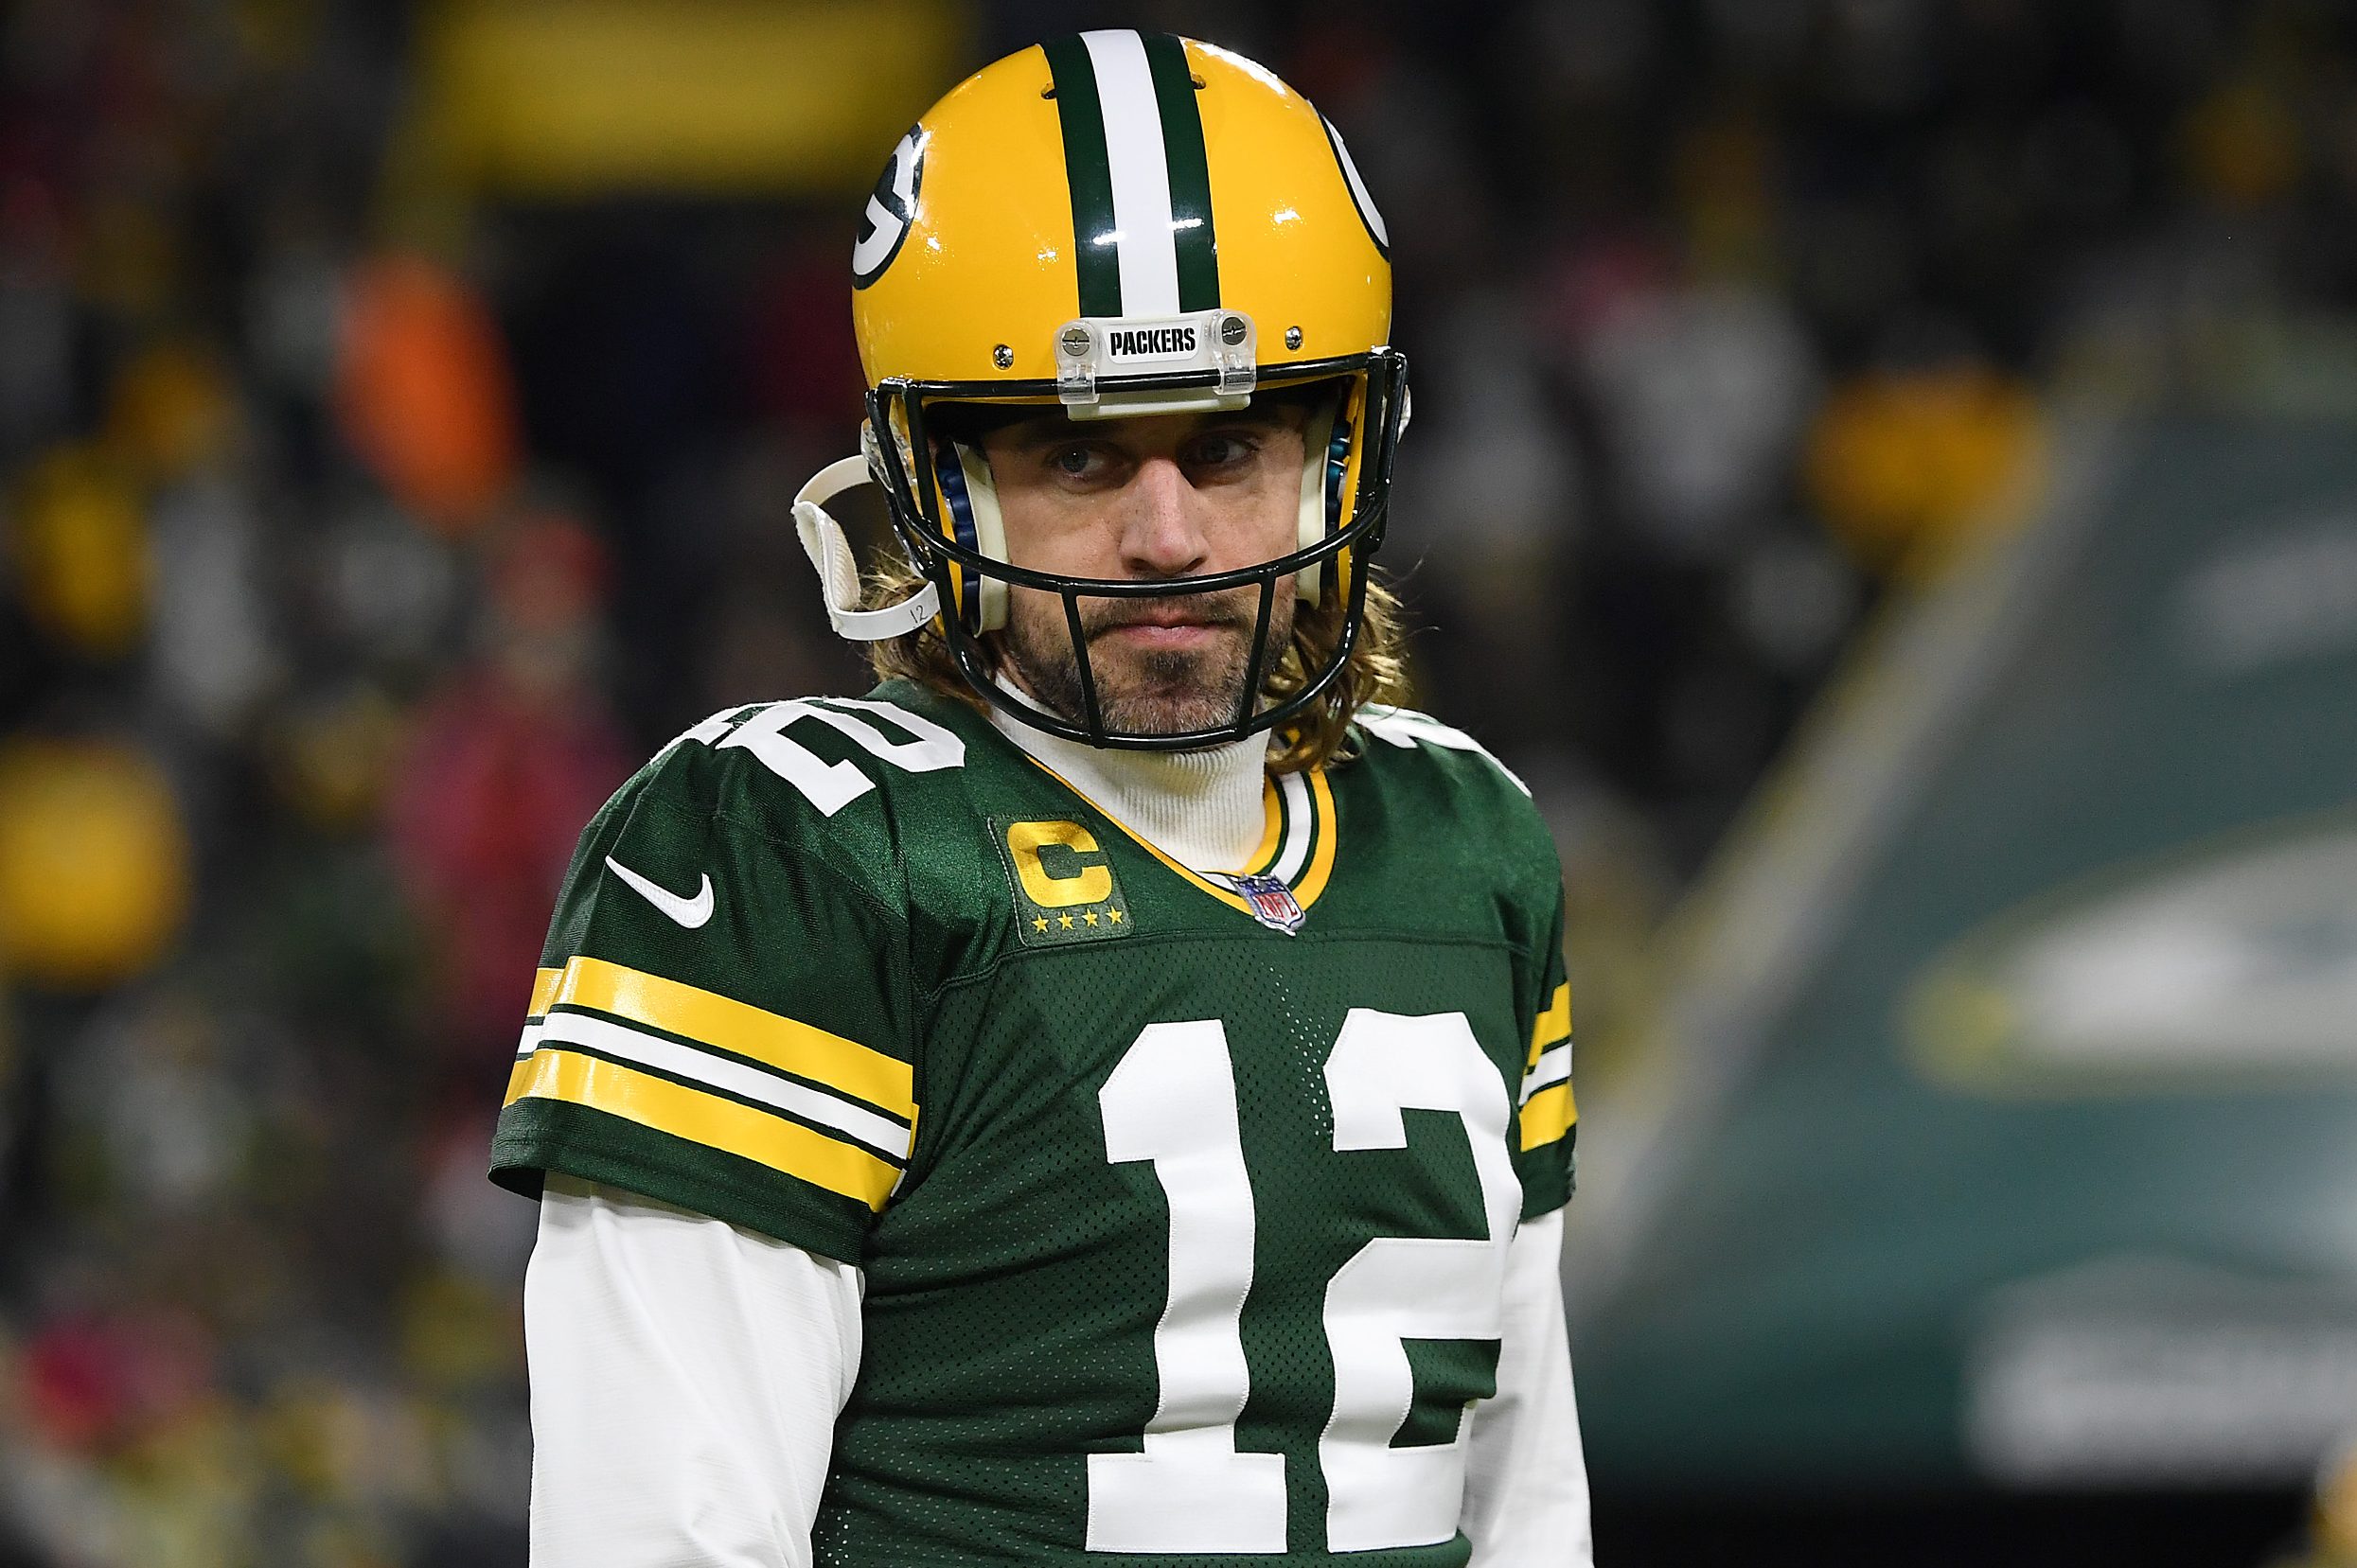 Aaron Rodgers of the Green Bay Packers warms up prior to the NFC Divisional Playoff game against the 49ers